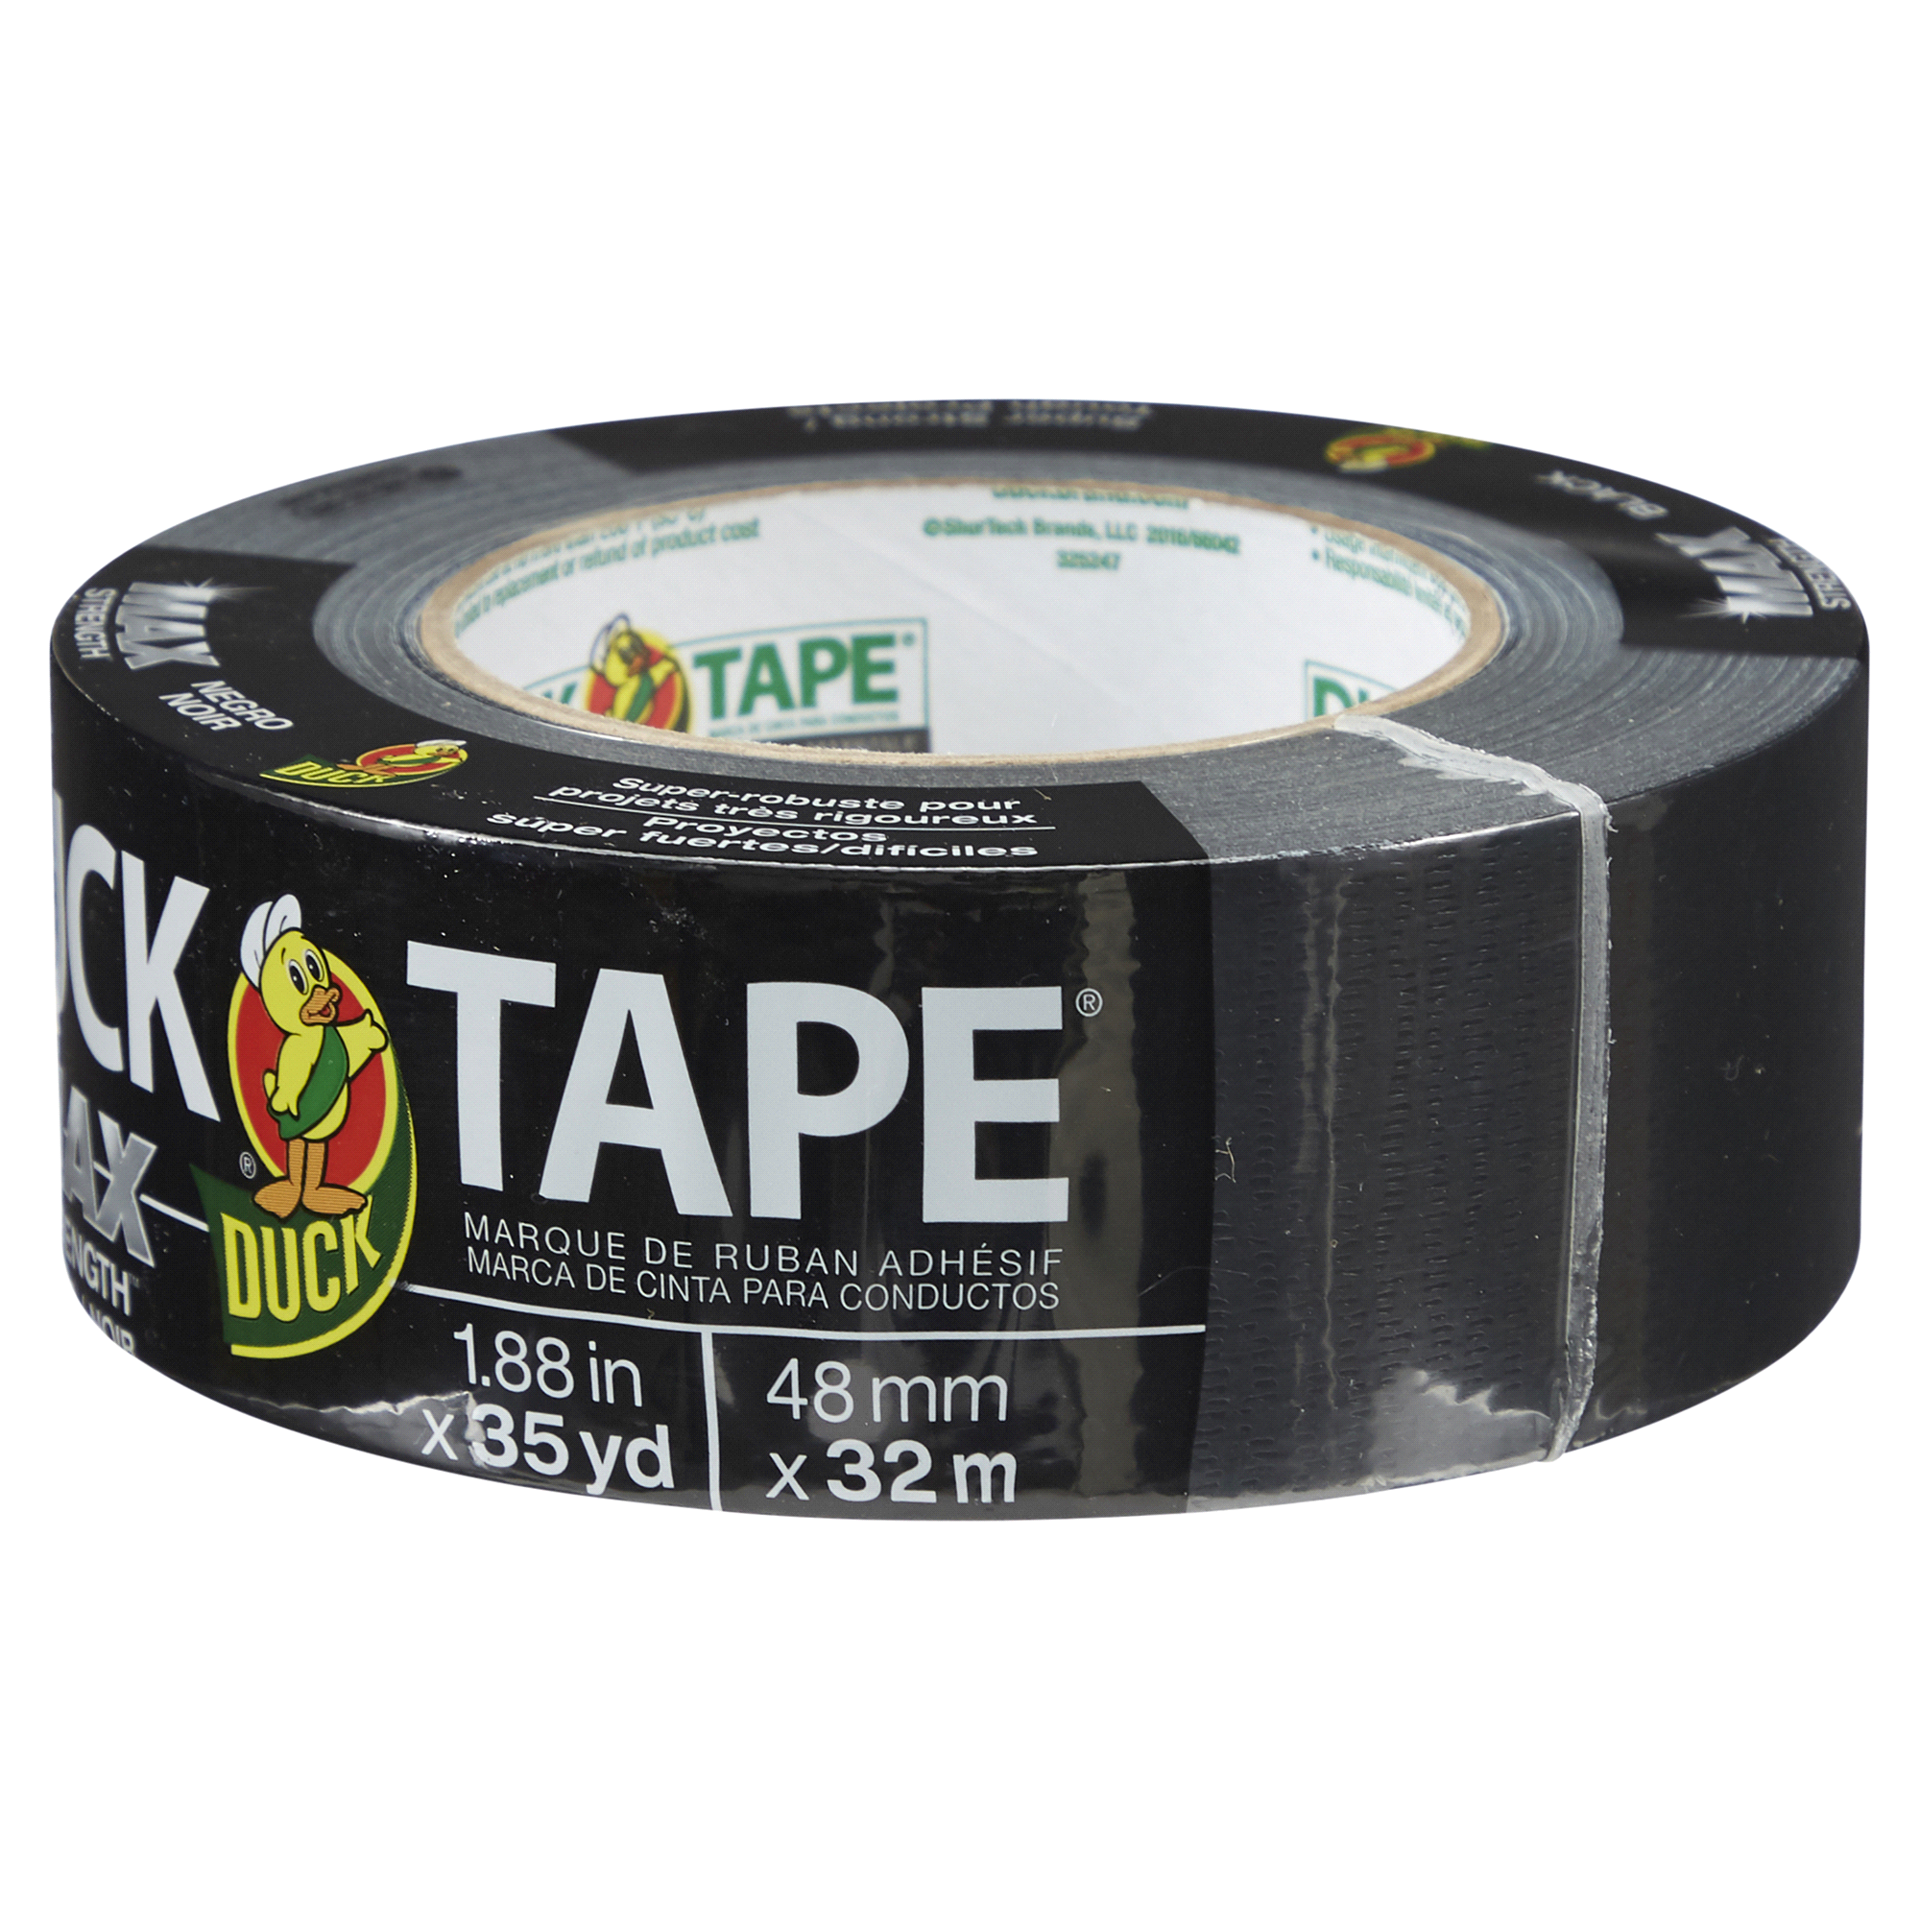 slide 9 of 29, Duck Duct Tape MAX Strength Tape, Black 1.88" x 35 yds, 1 ct